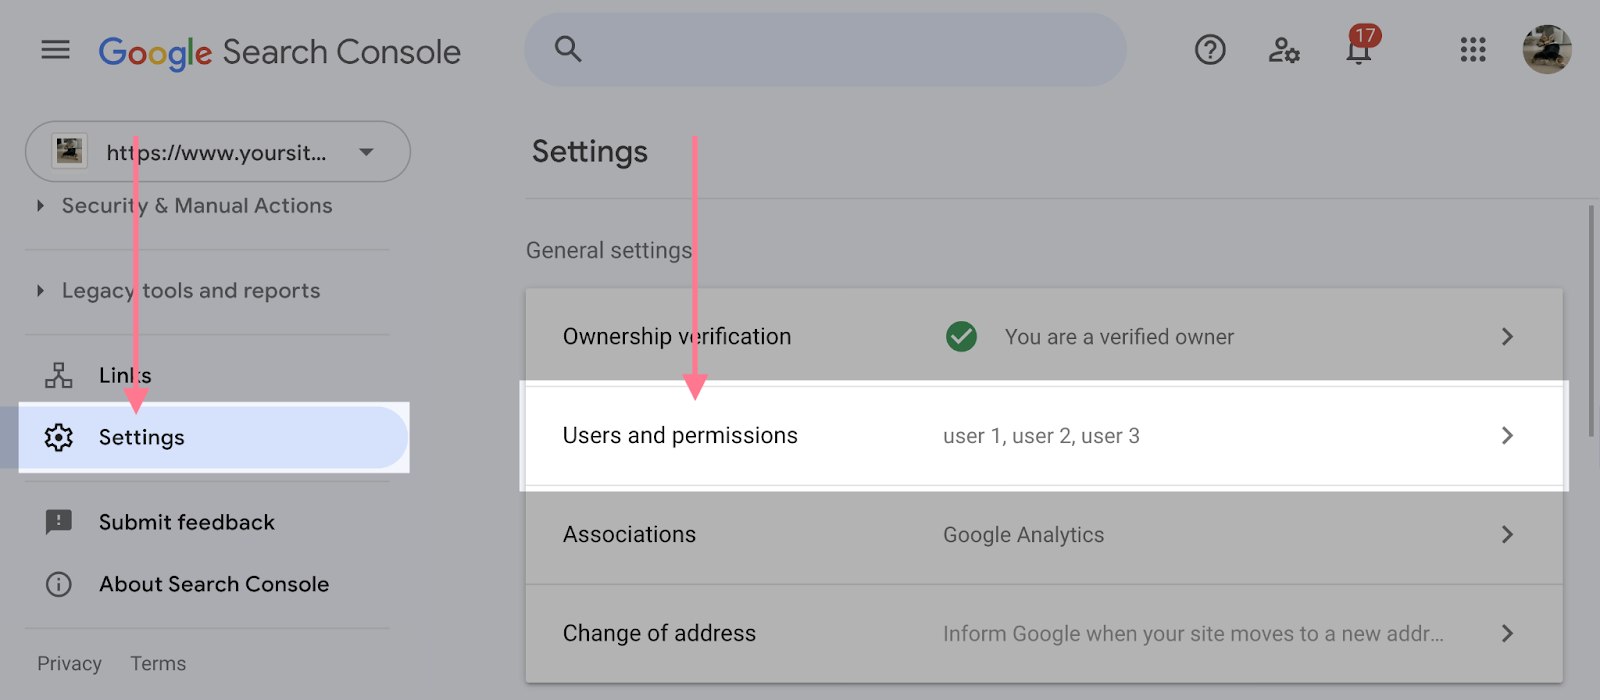 Users and permissions